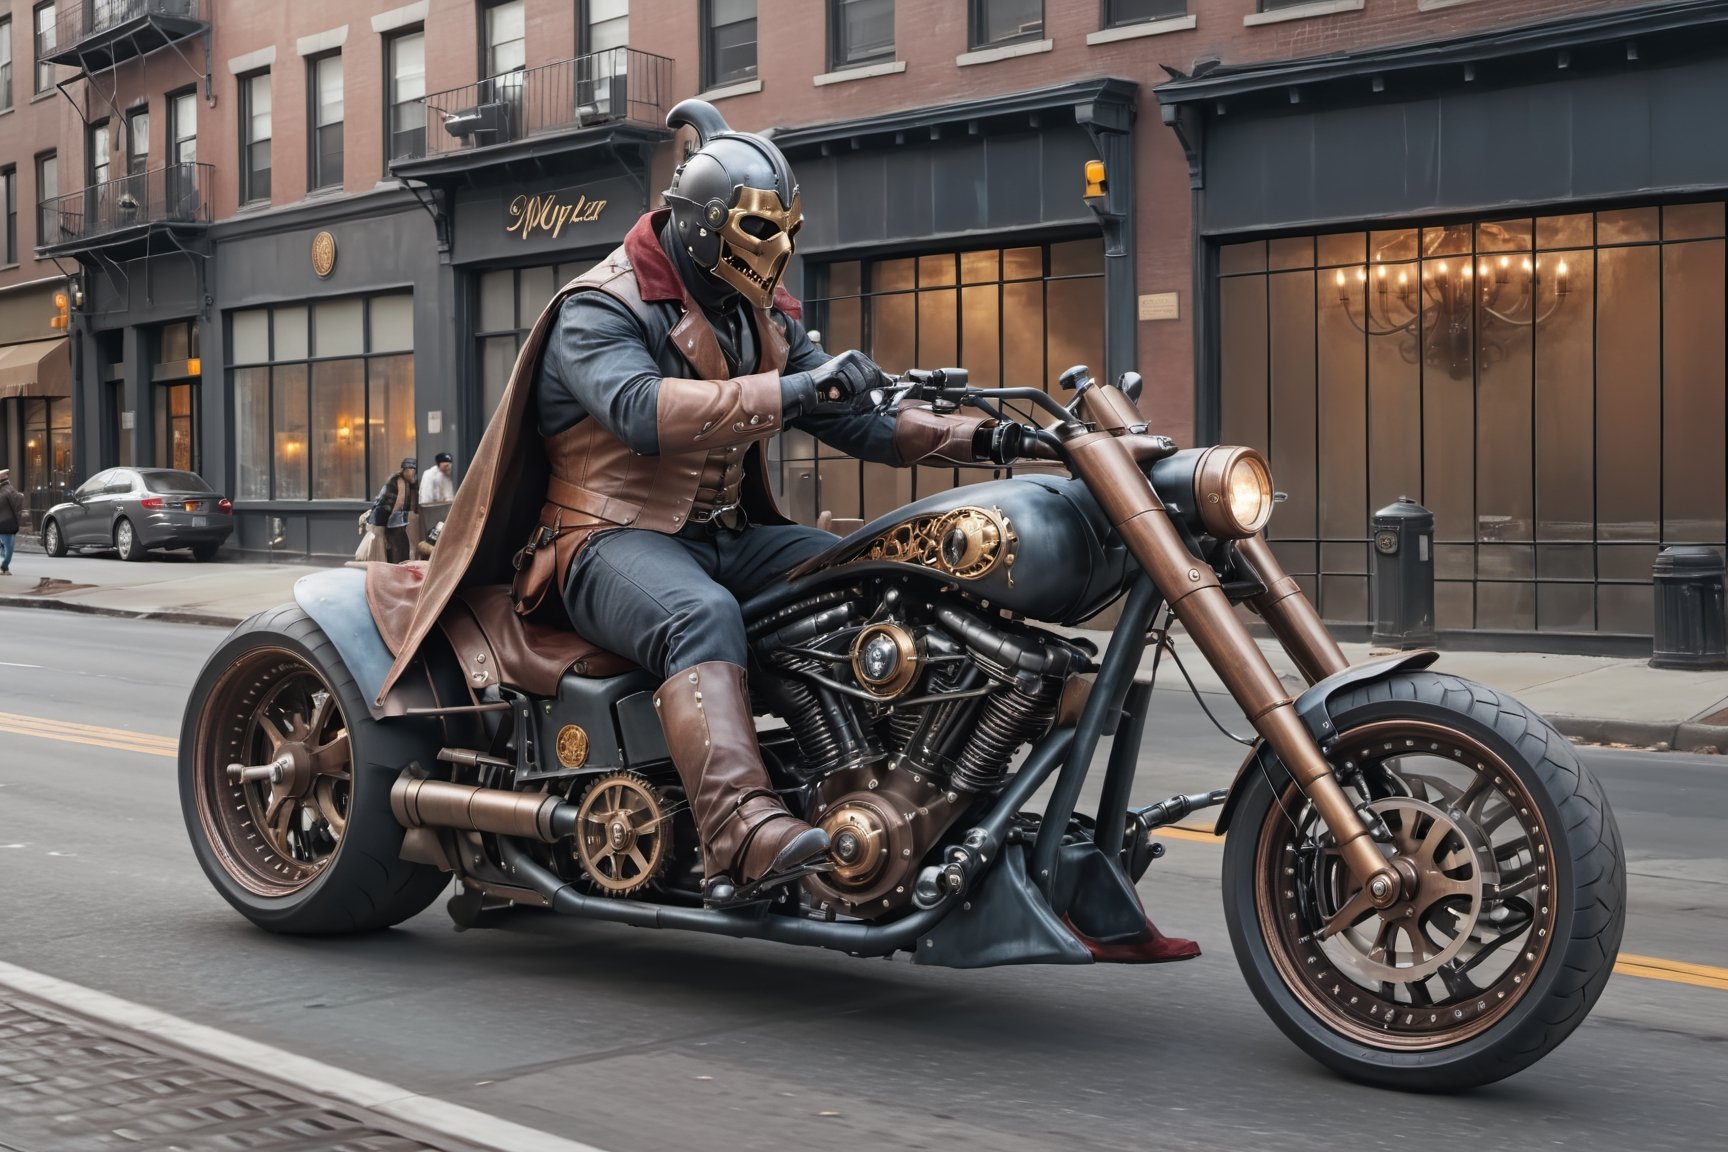 ((headless horseman)) riding a steampunk vehicle on the (streets of NYC at night), motorcycle, best quality, highres, ultra high resolution, masterpiece, realistic, lifestyle photography, detailed photo, 8K wallpaper, intricate details, film grain, soft shadows, natural lighting, detailed background, steampunk style,Walz